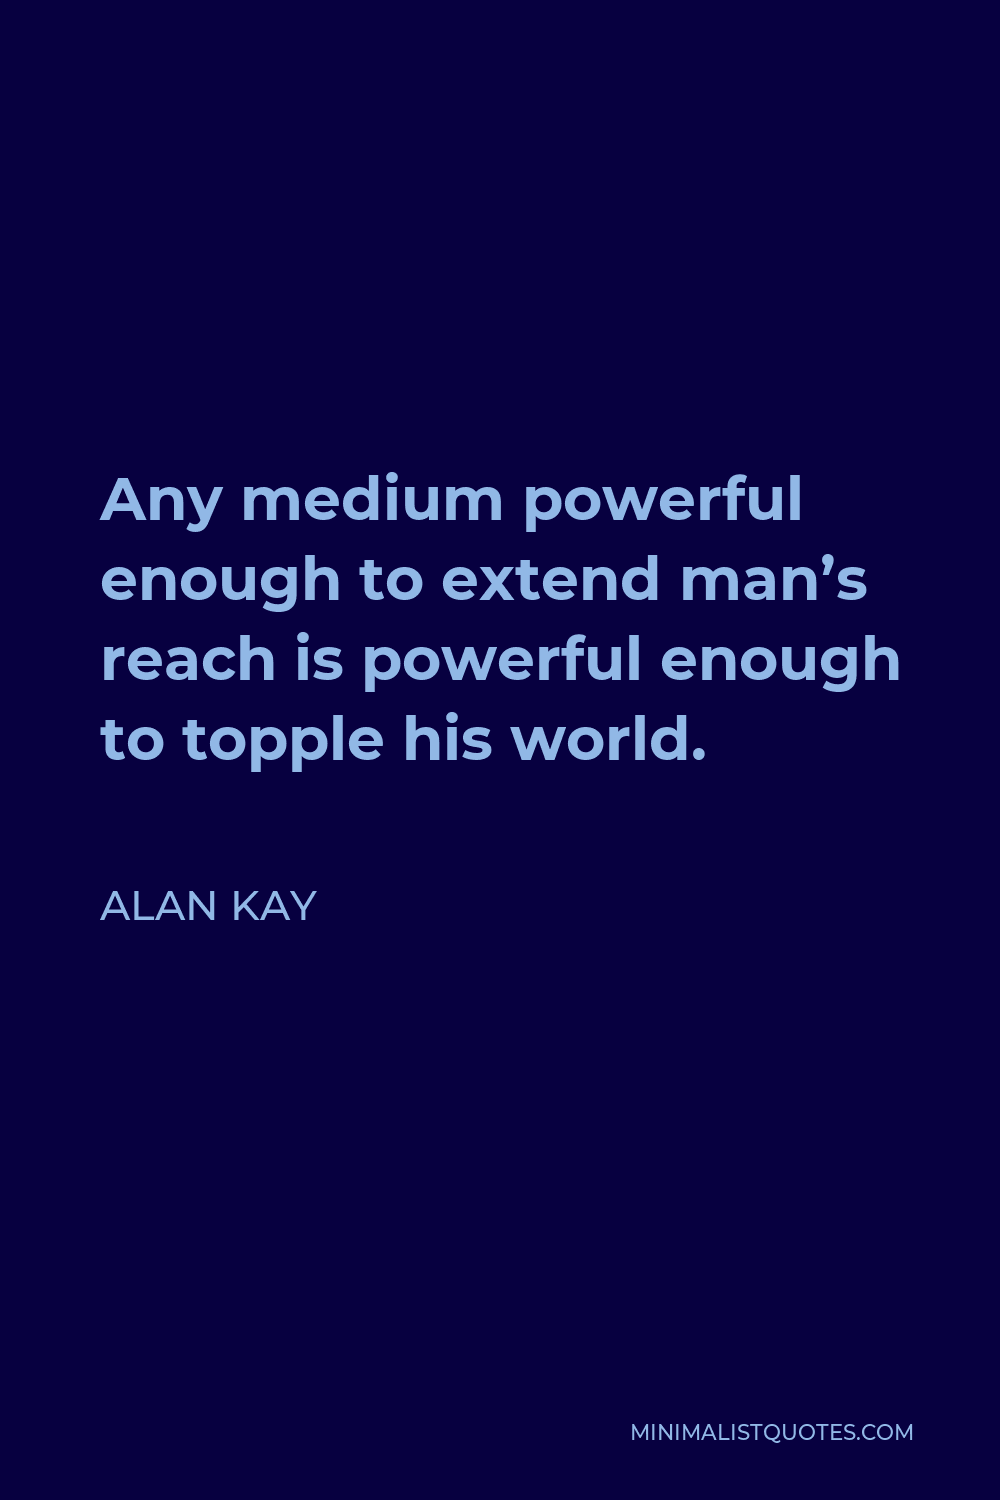 Alan Kay Quote - Any medium powerful enough to extend man’s reach is powerful enough to topple his world.